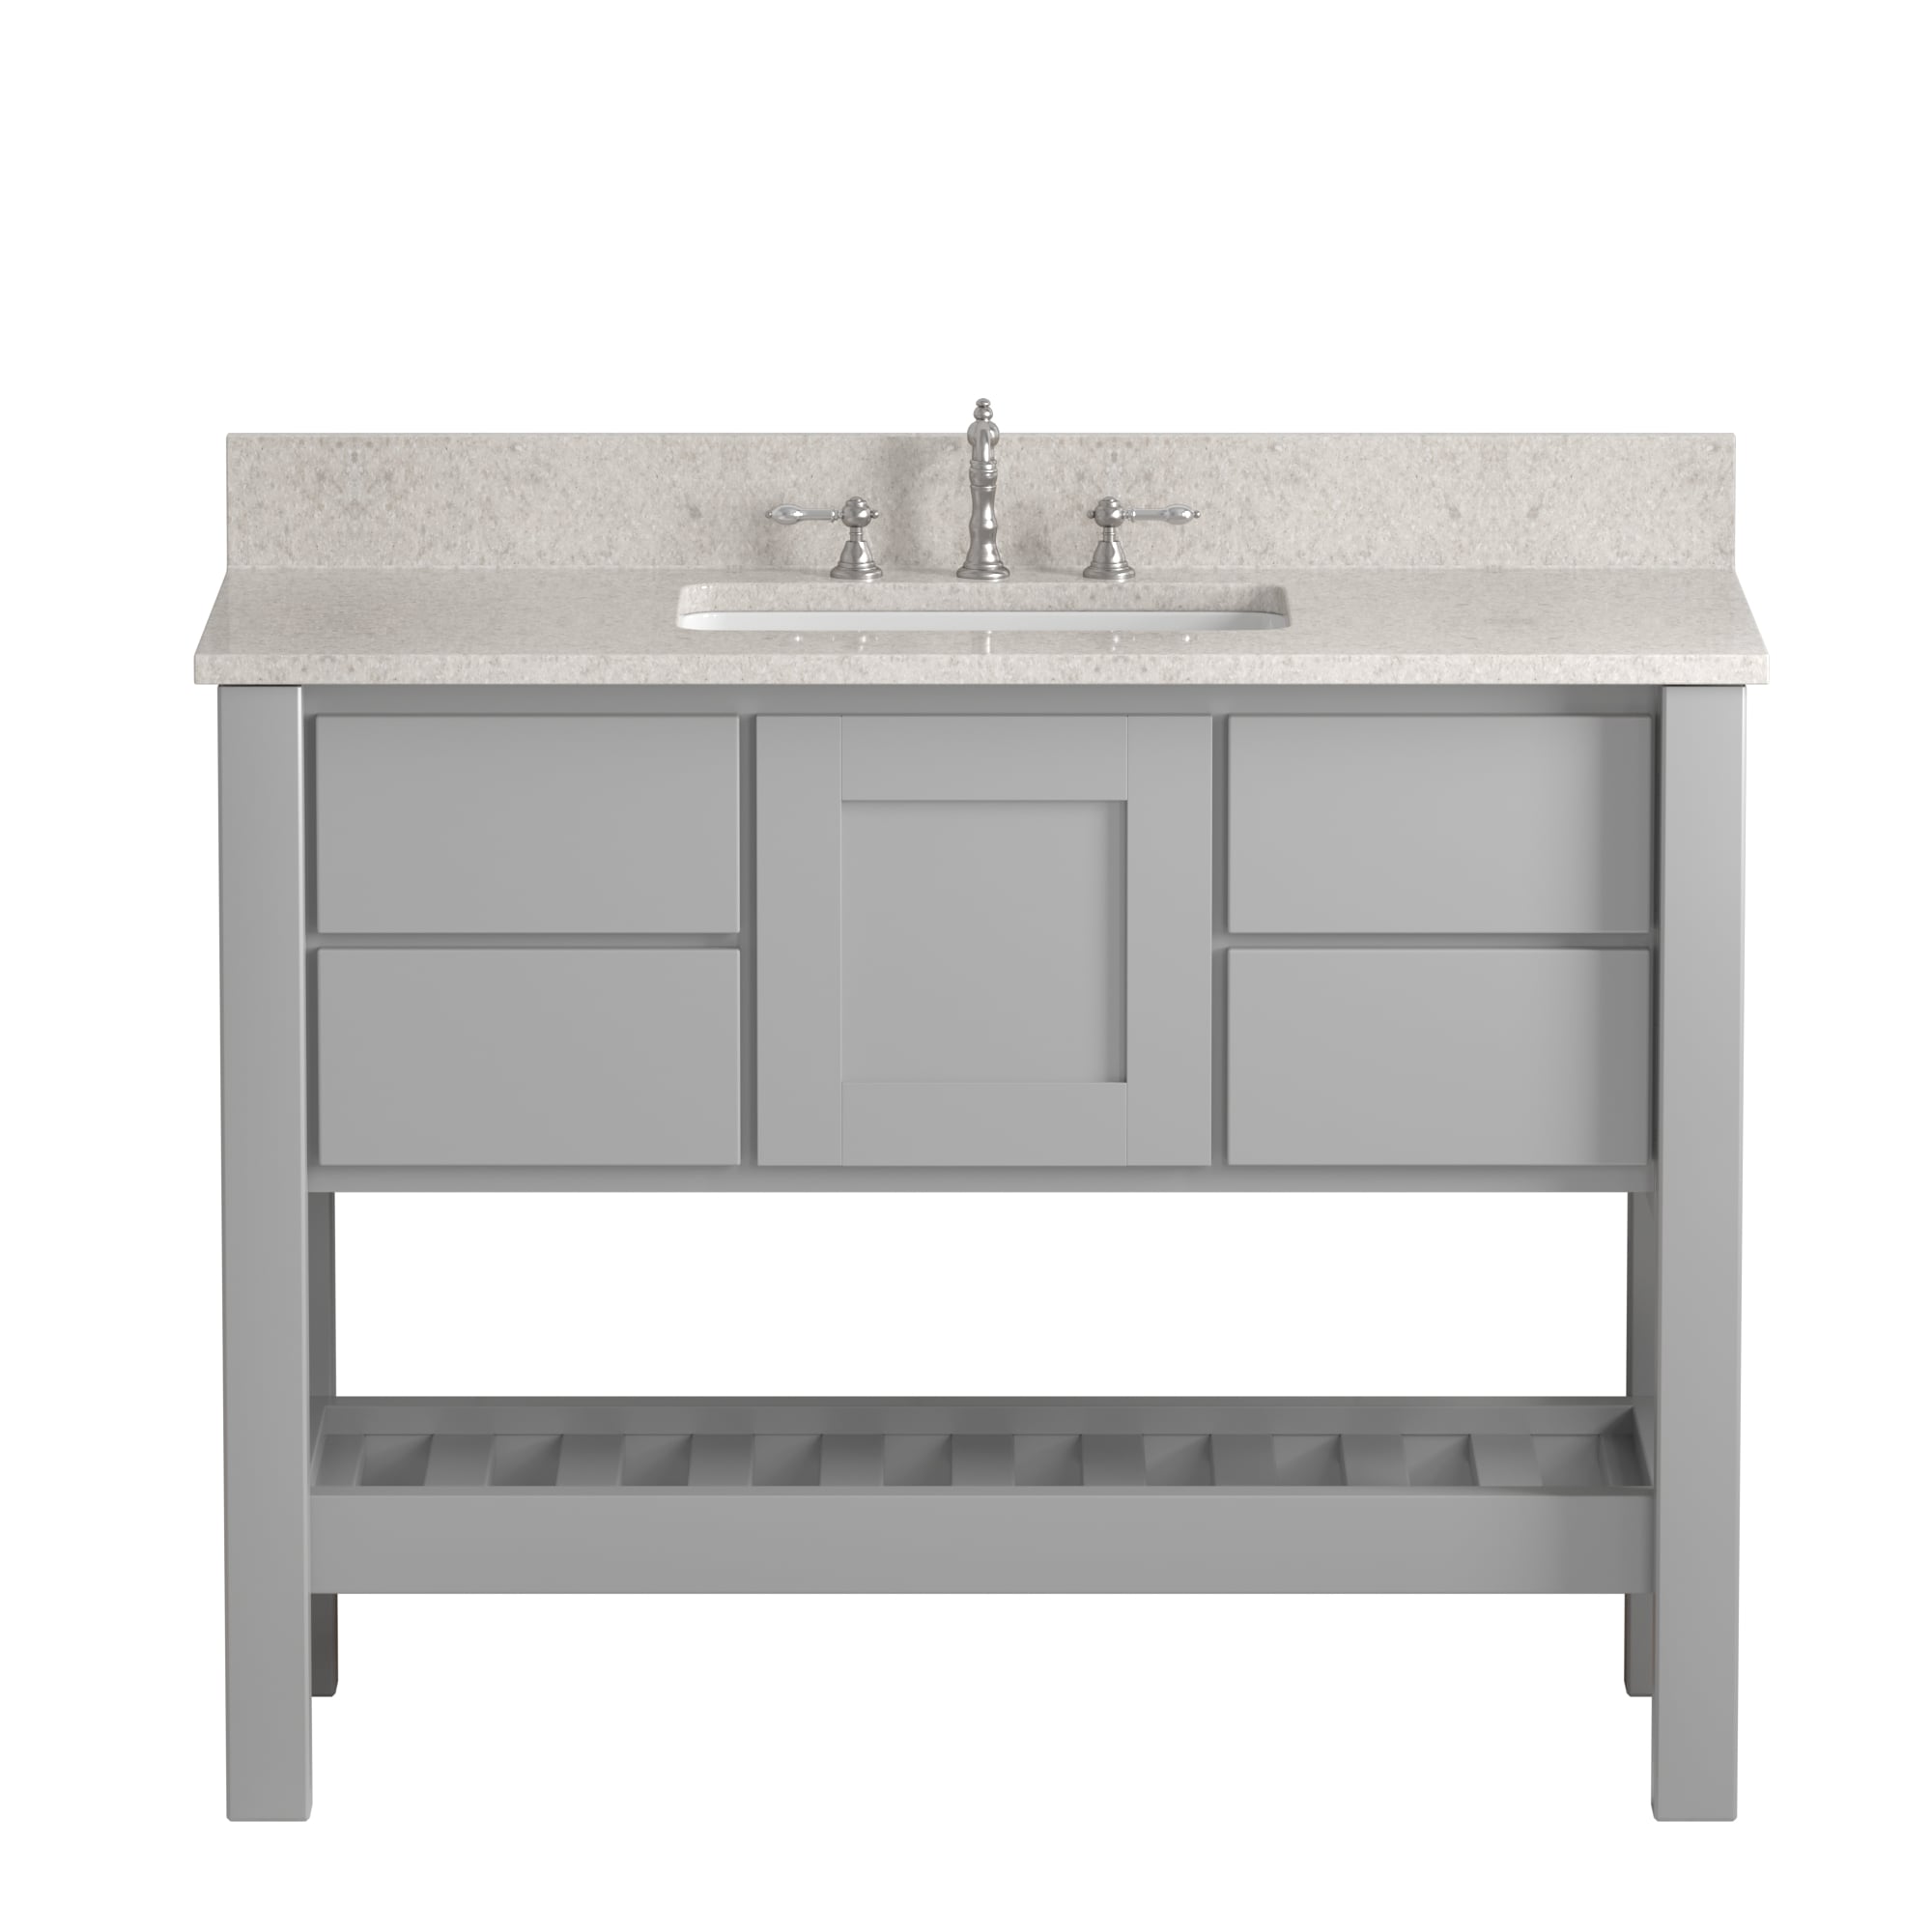 Made in the USA, 48" Gray Solid Wood and Basin Sink Vanity with Countertop Options